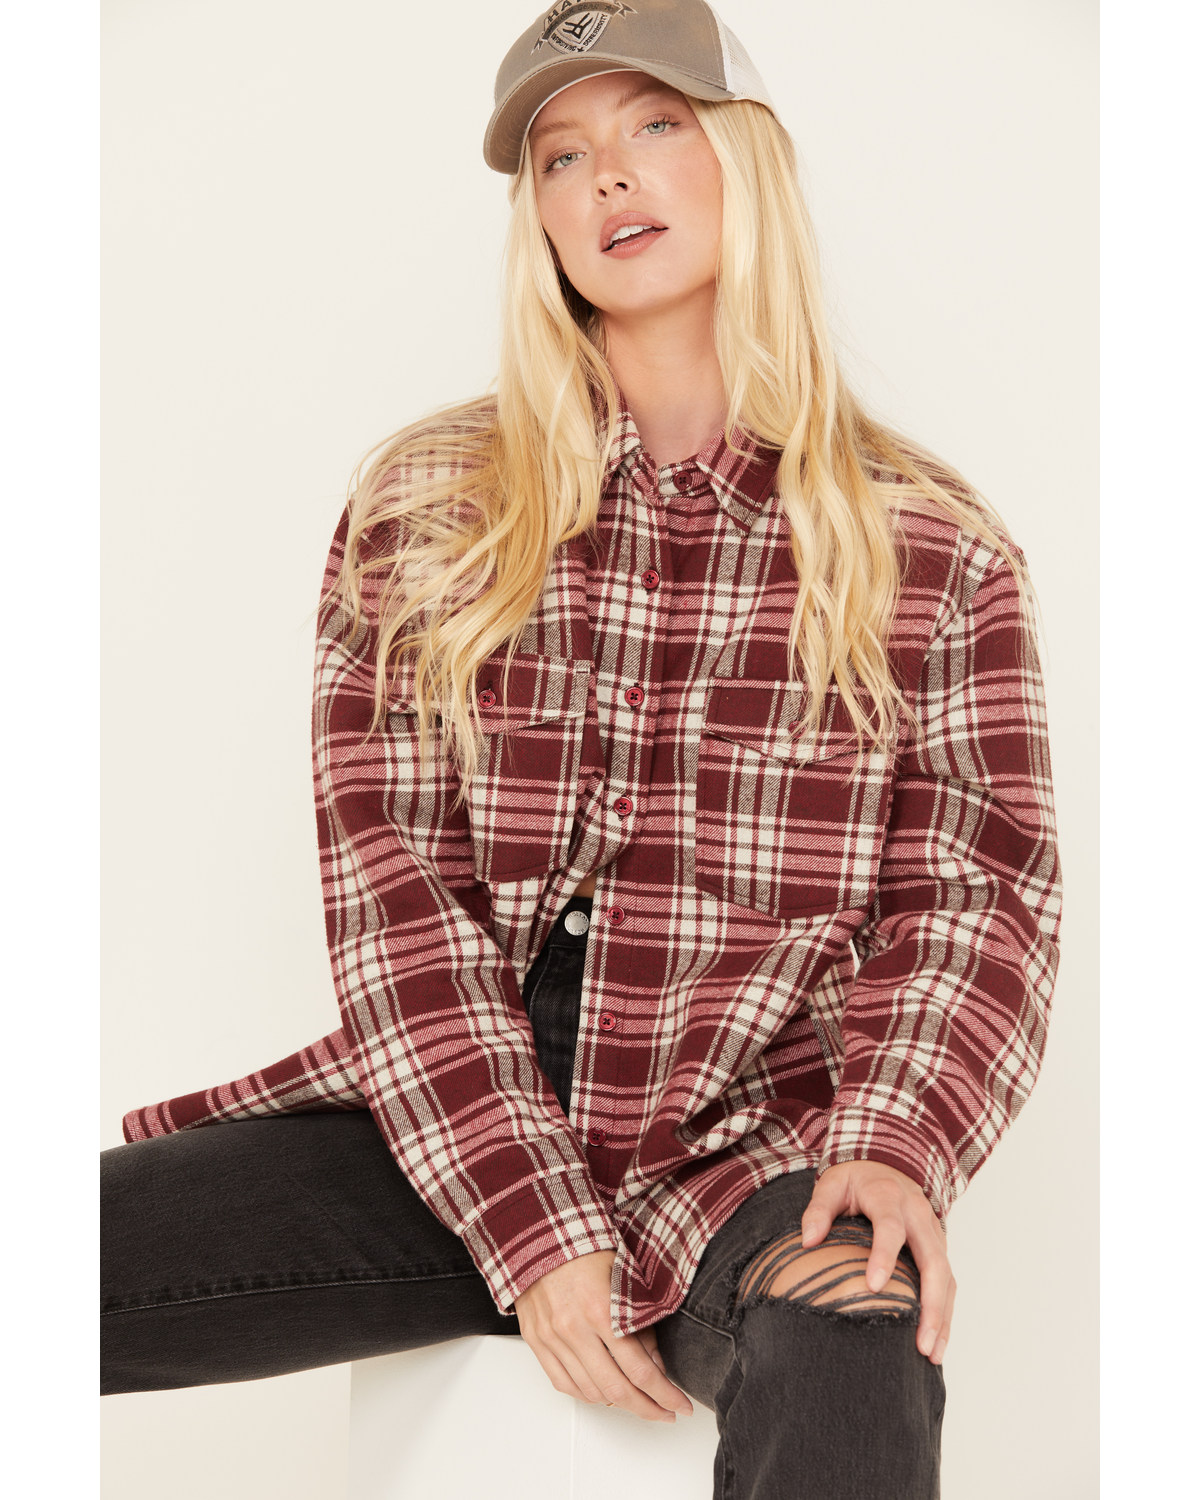 Cleo + Wolf Women's Plaid Print Long Sleeve Button-Down Oversized Shacket